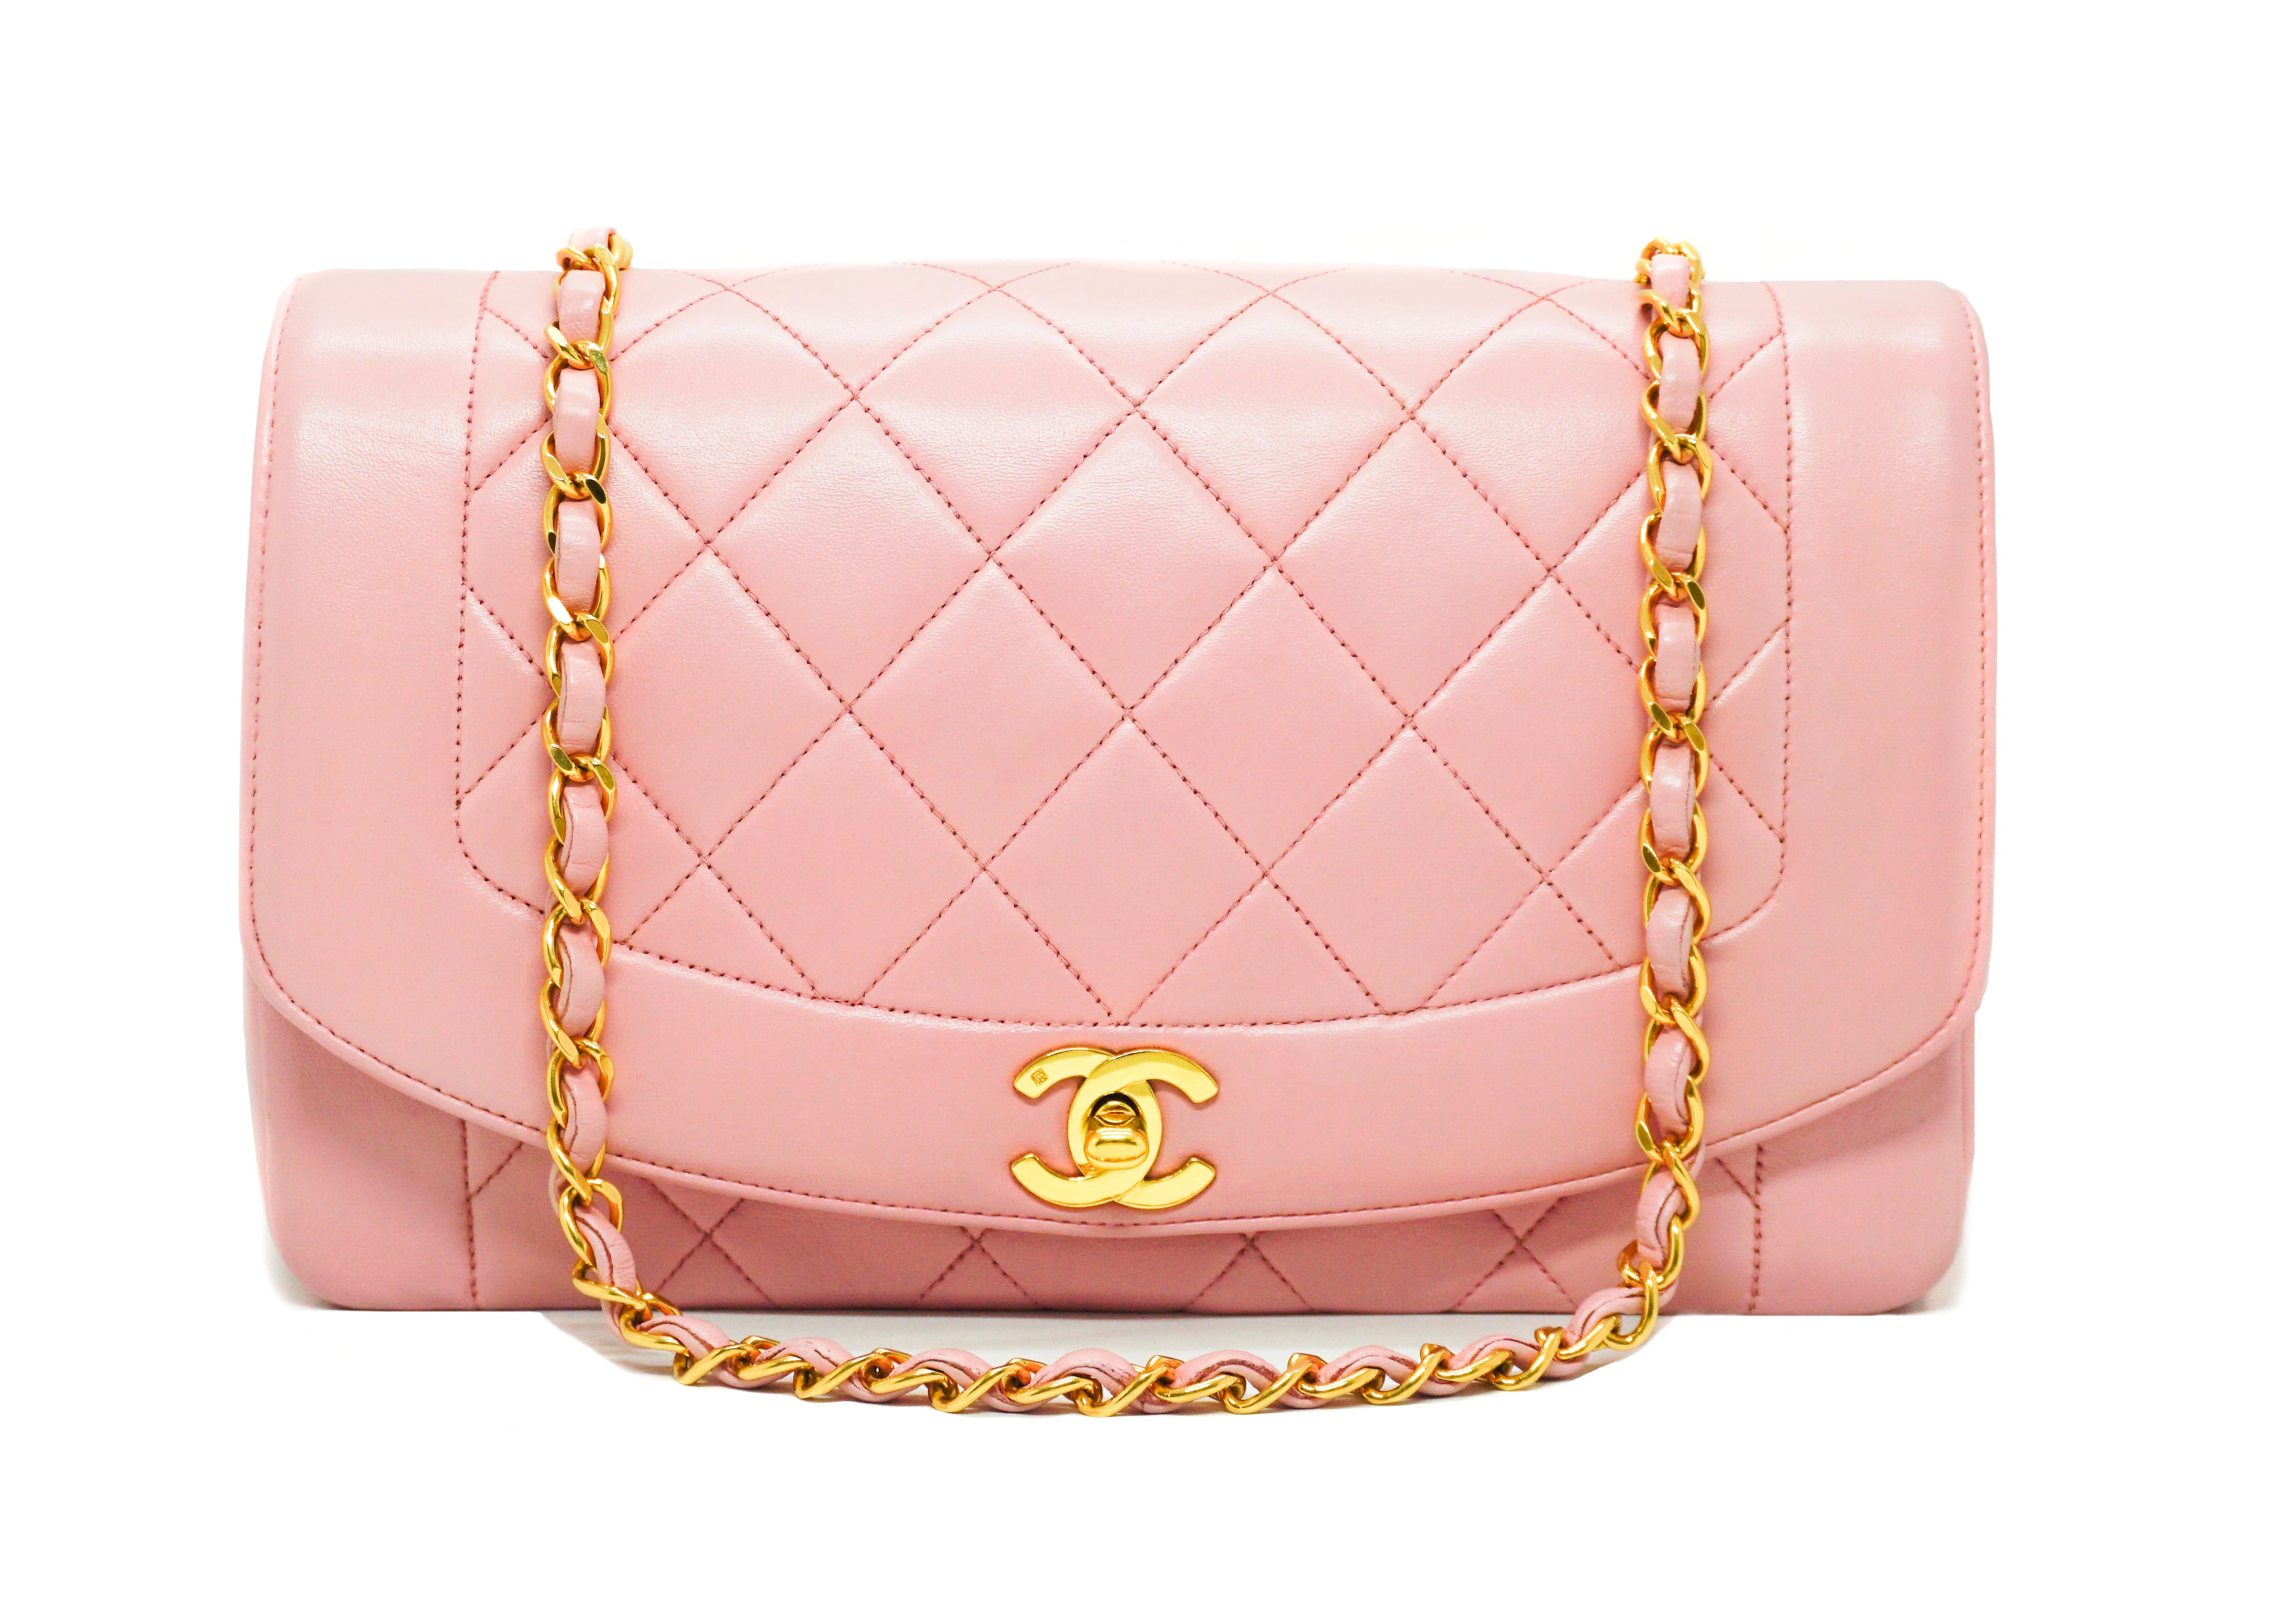 Limited edition CHANEL pink mirror: worth it? 🎀, Gallery posted by Diana